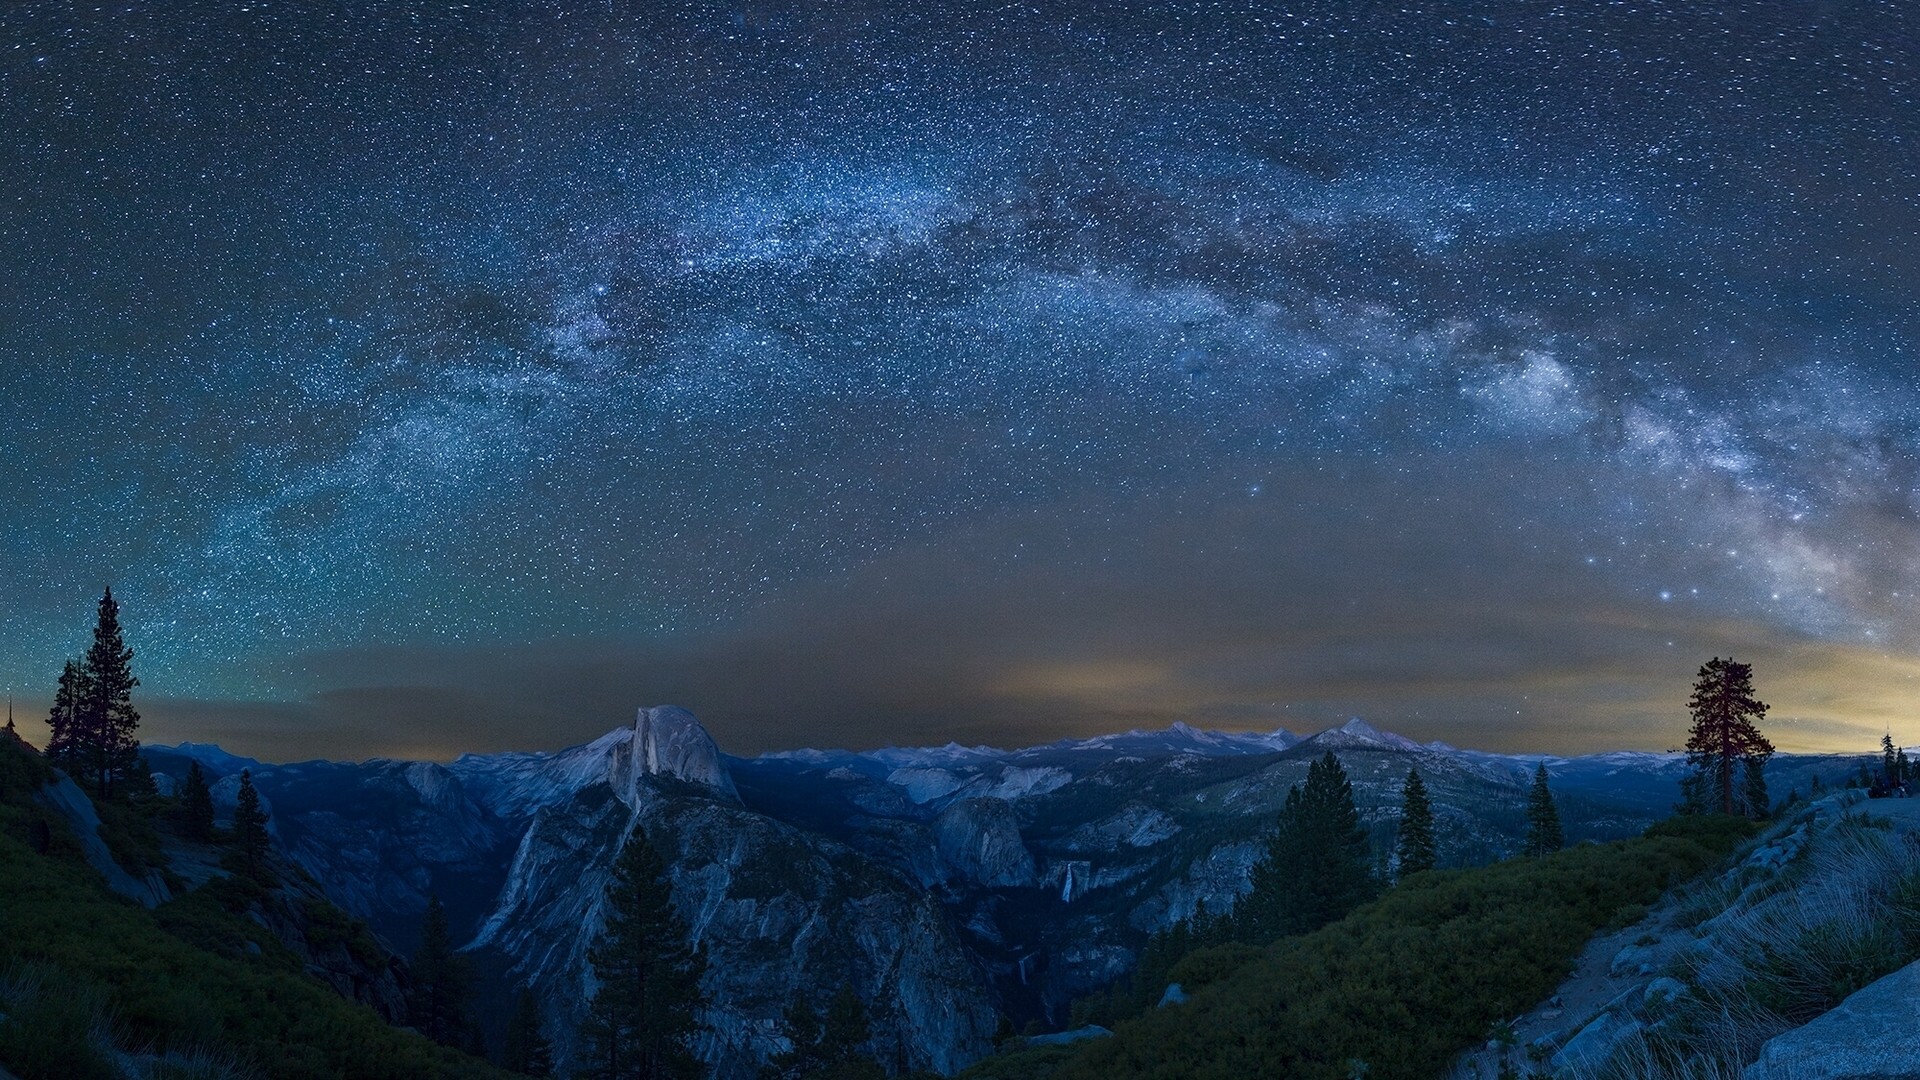 Night Trees Nature Landscape Yosemite National Park Milky Way USA Half Dome Mountains Stars Rock For 1920x1080